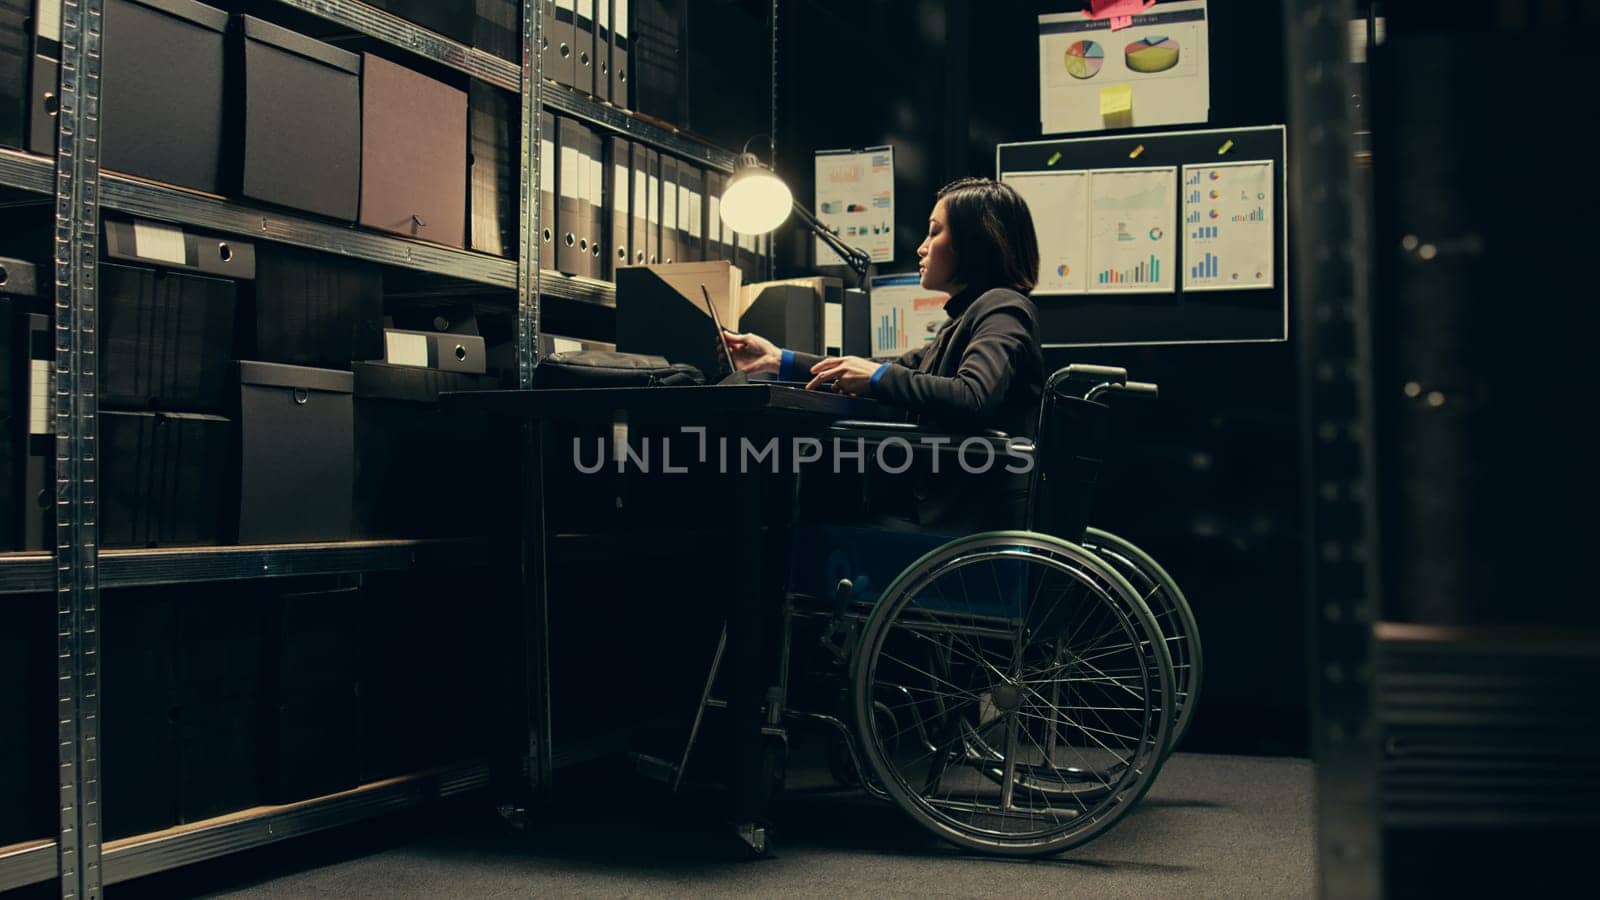 Wheelchair user conducting investigation in disability friendly incident room by DCStudio